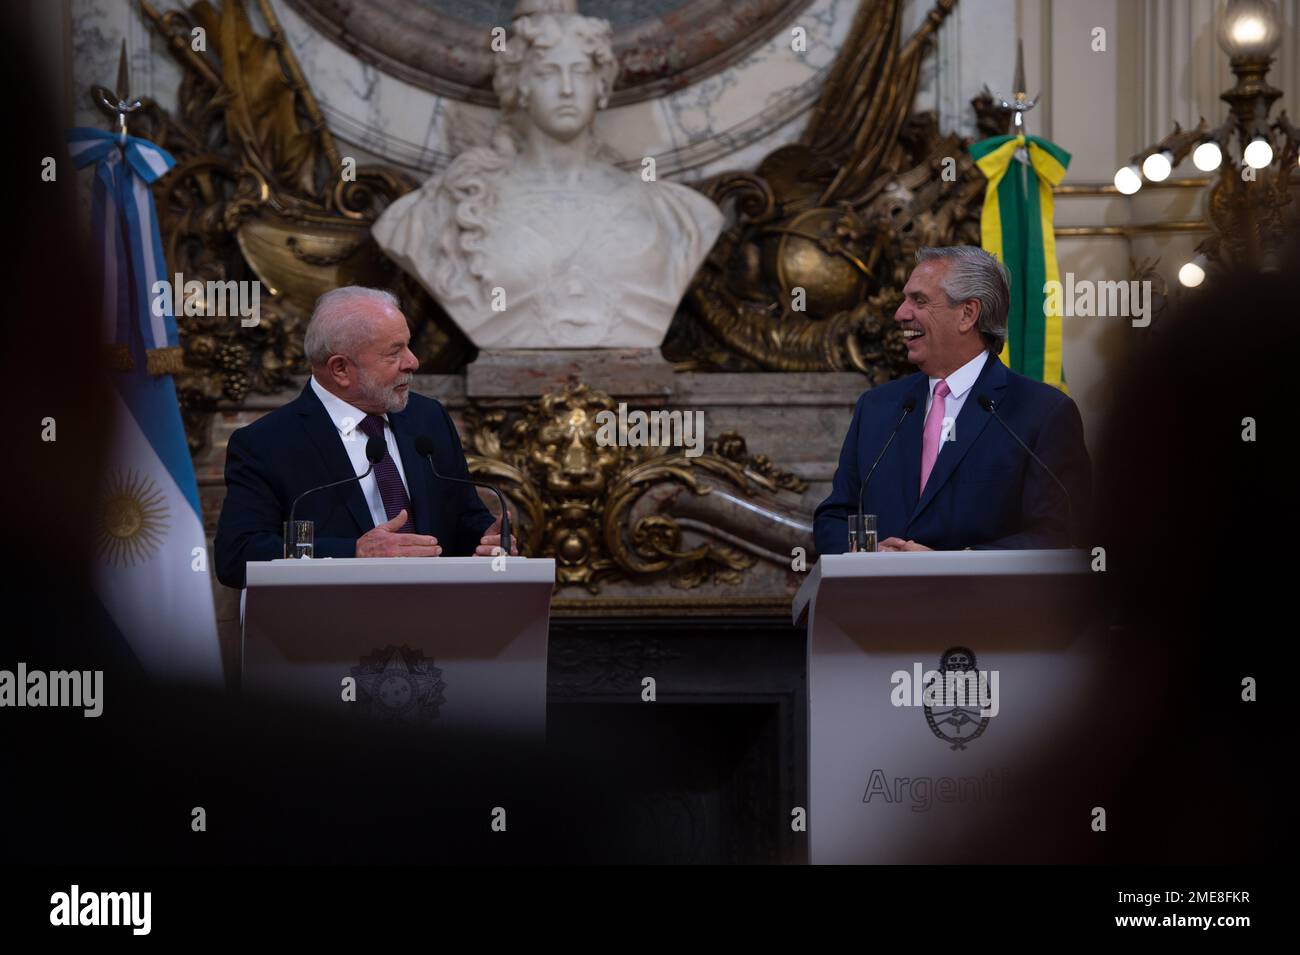 Buenos Aires, Argentina. 23rd Jan, 2023. Luiz Inacio Lula da Silva (l), president of Brazil, and Alberto Fernandez (r), president of Argentina, laugh at a joint press conference. The two major South American nations, Argentina and Brazil, are looking to revive relations and deepen trade. Argentina and Brazil are thinking aloud about a common currency. Credit: Florencia Martin/dpa/Alamy Live News Stock Photo